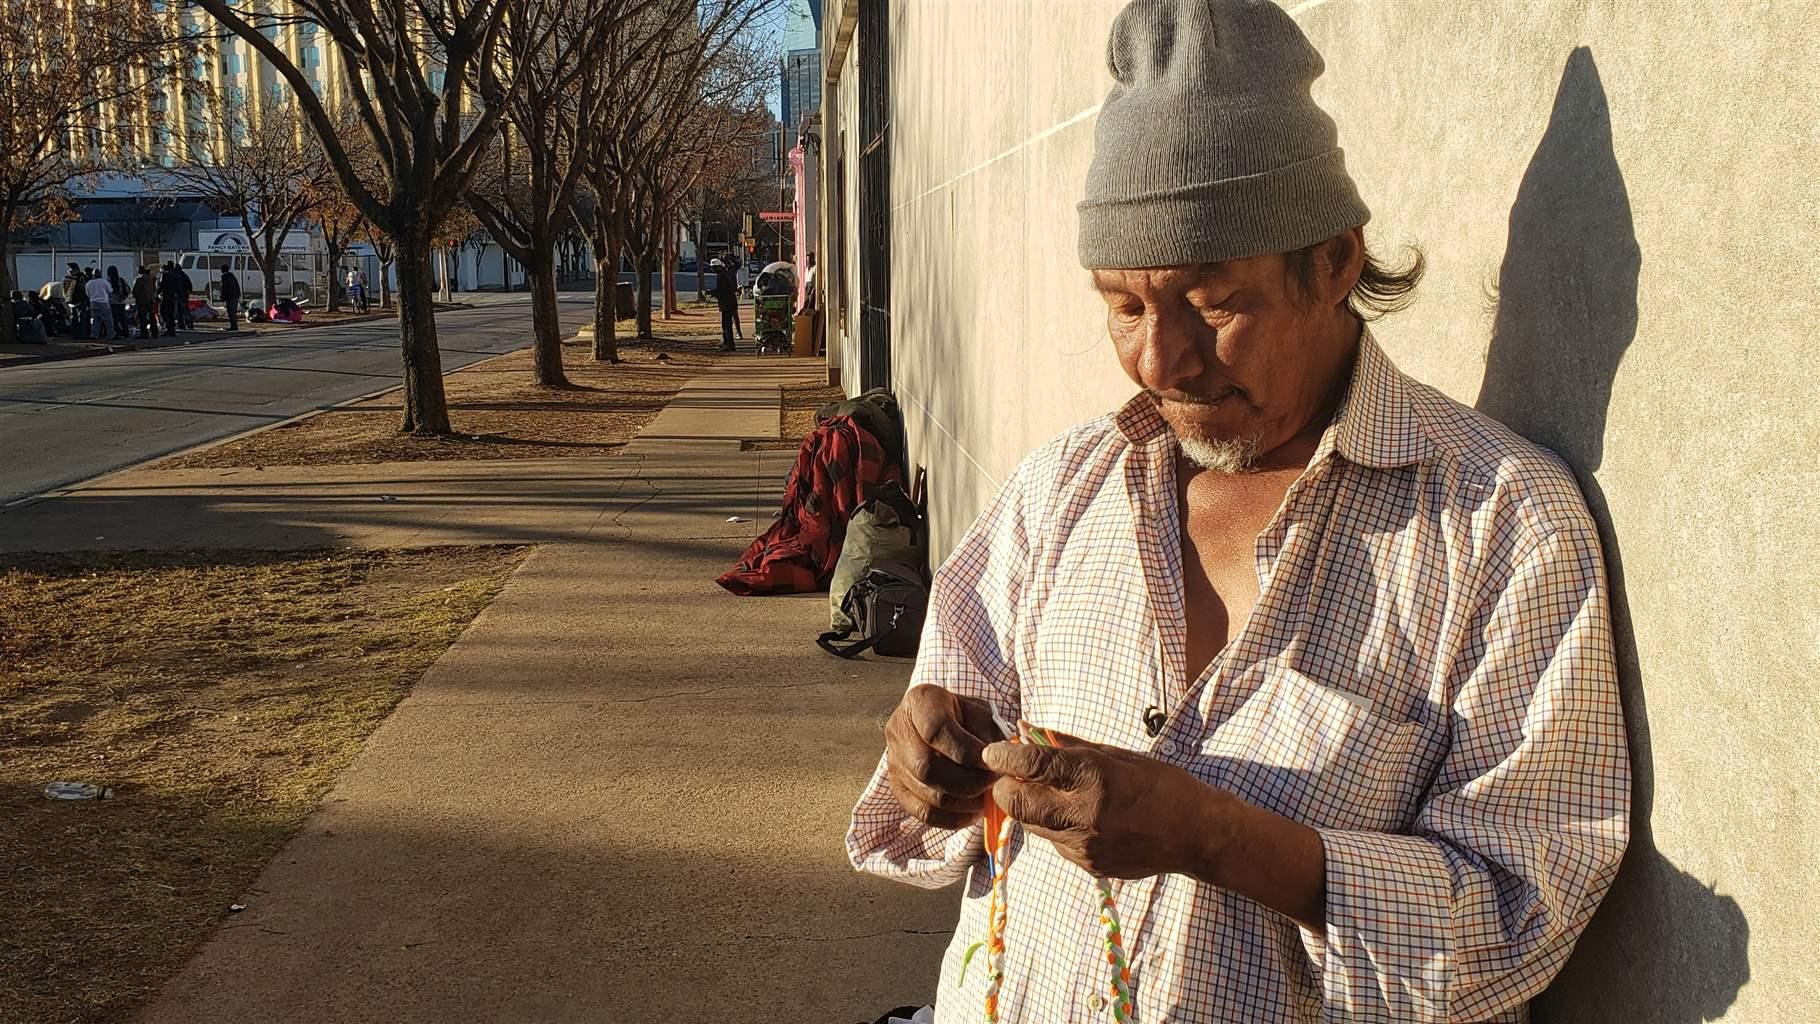 Joel Martinez Gregorio, 60, lost his home after contracting COVID-19 and being hospitalized for three weeks. He’s been living on the street since September. 